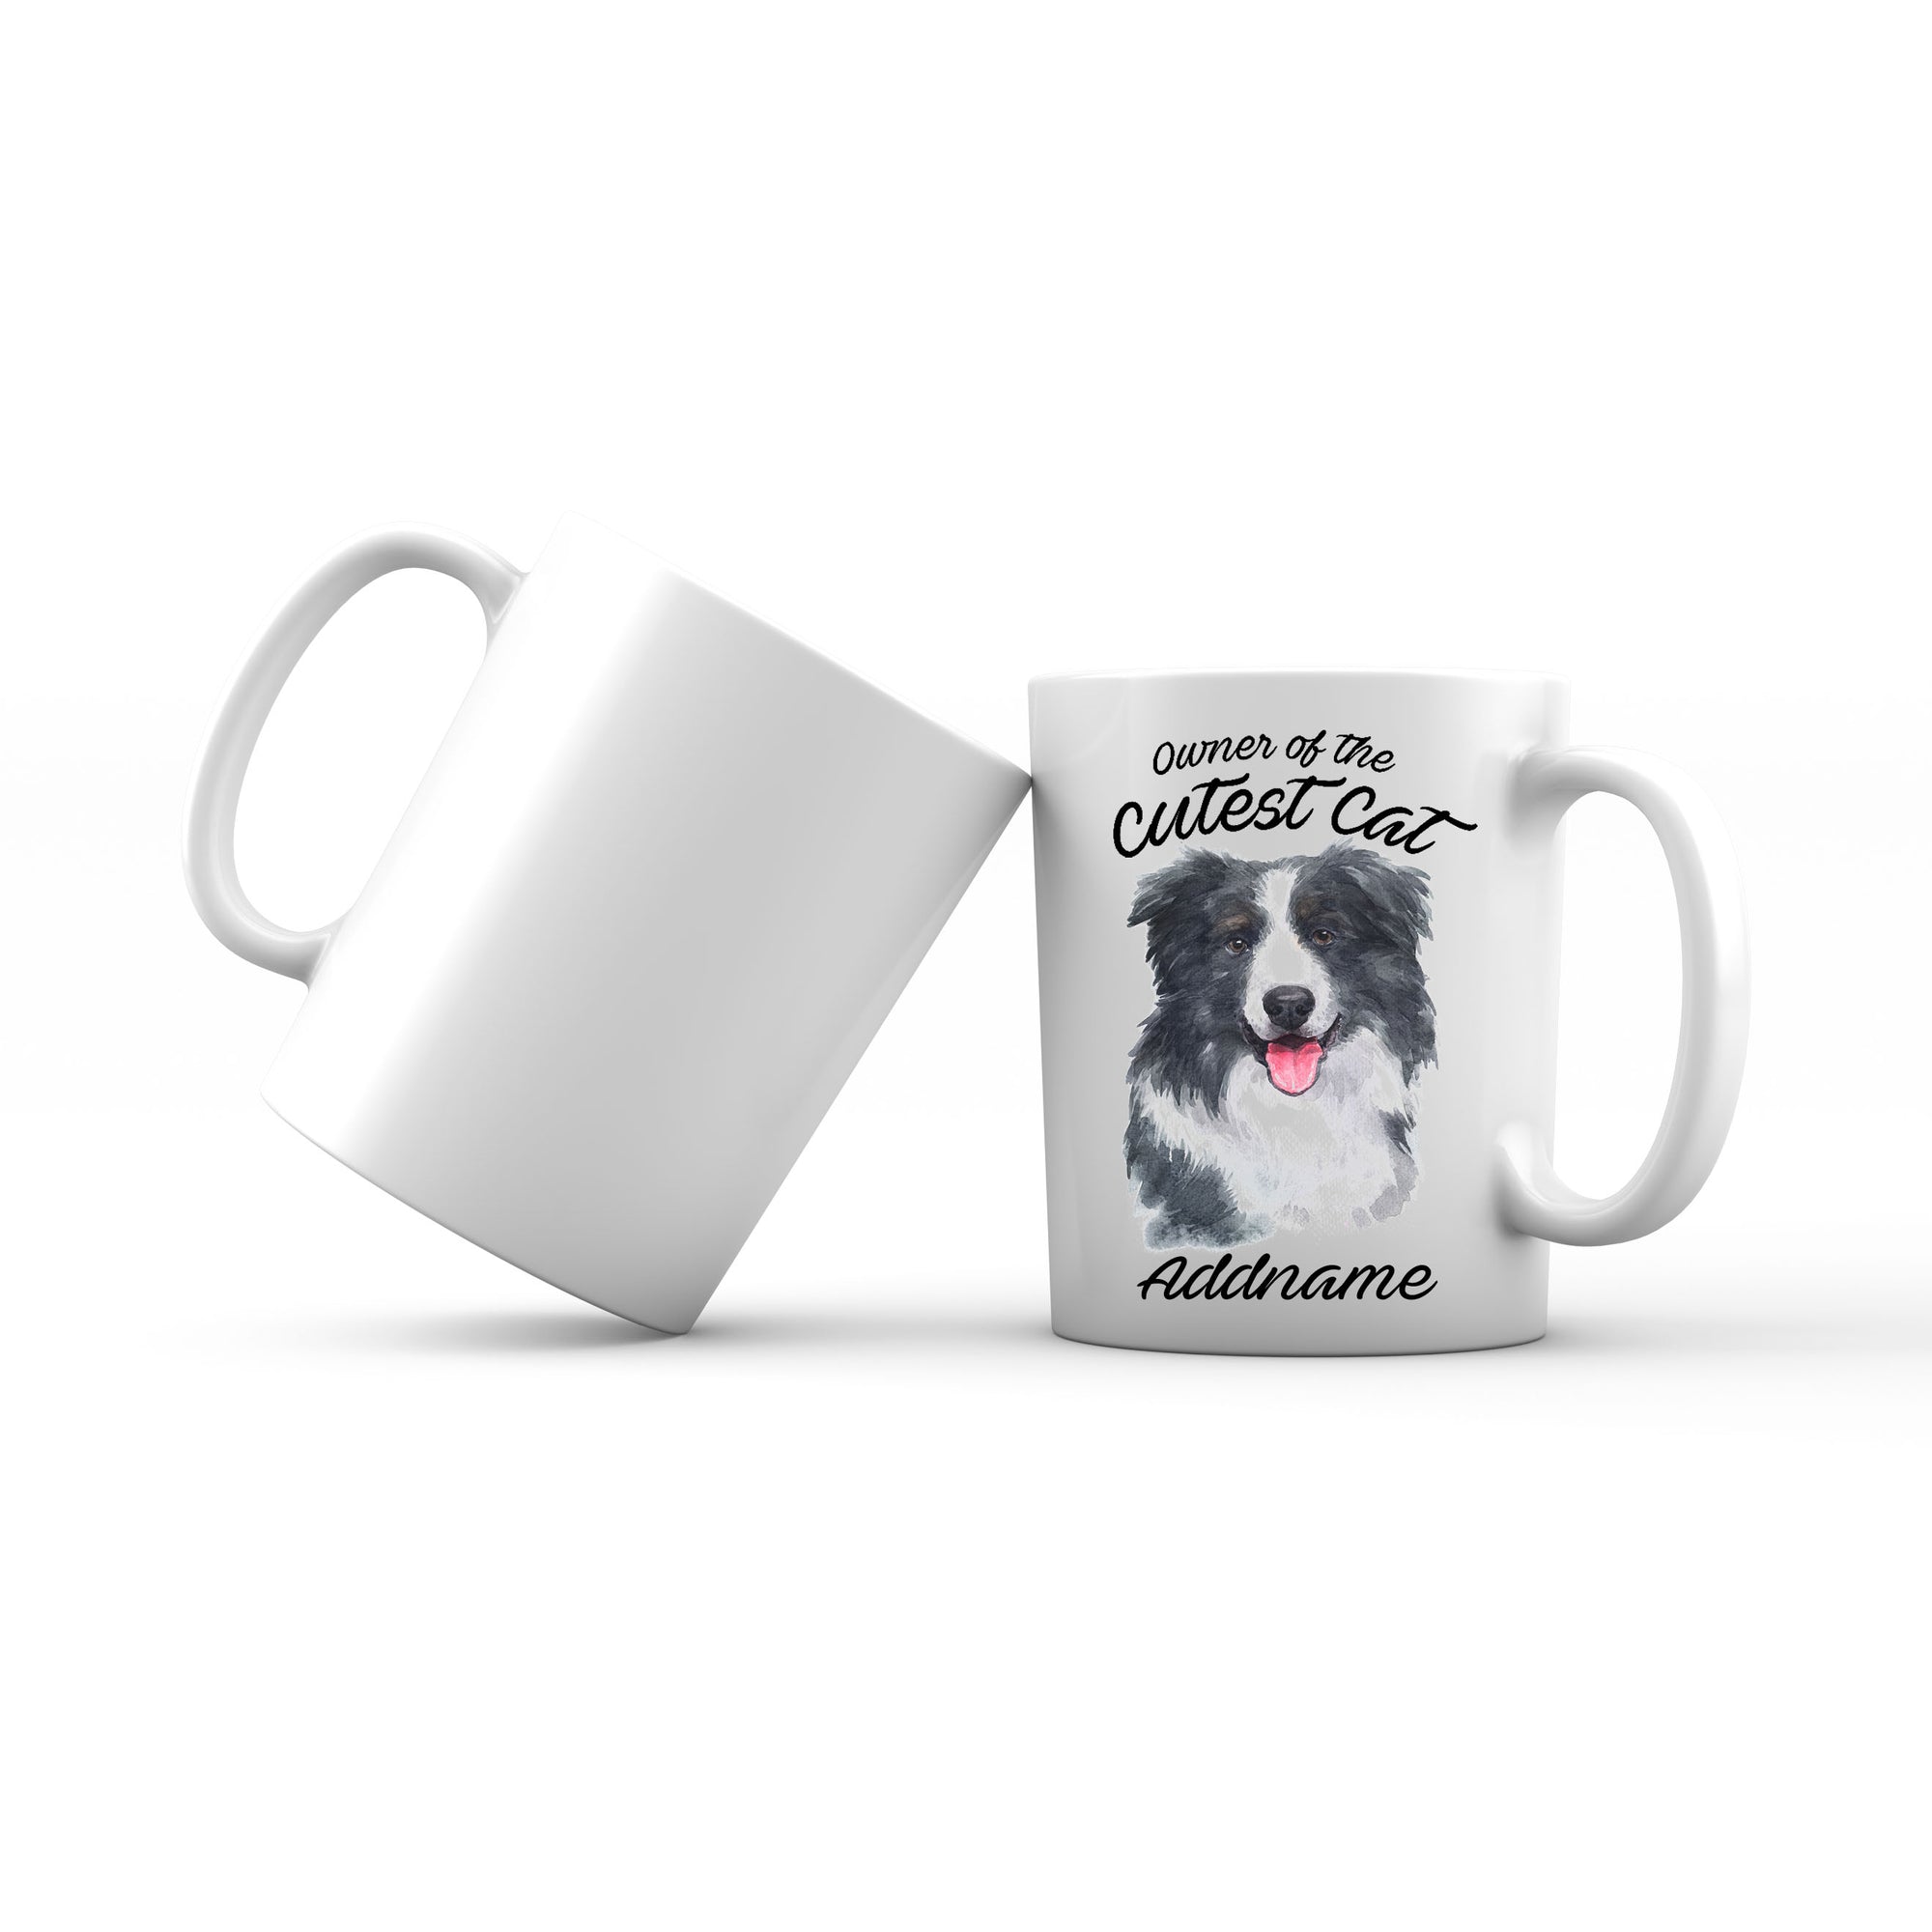 Watercolor Dog Owner Of The Cutest Dog Border Collie Addname Mug